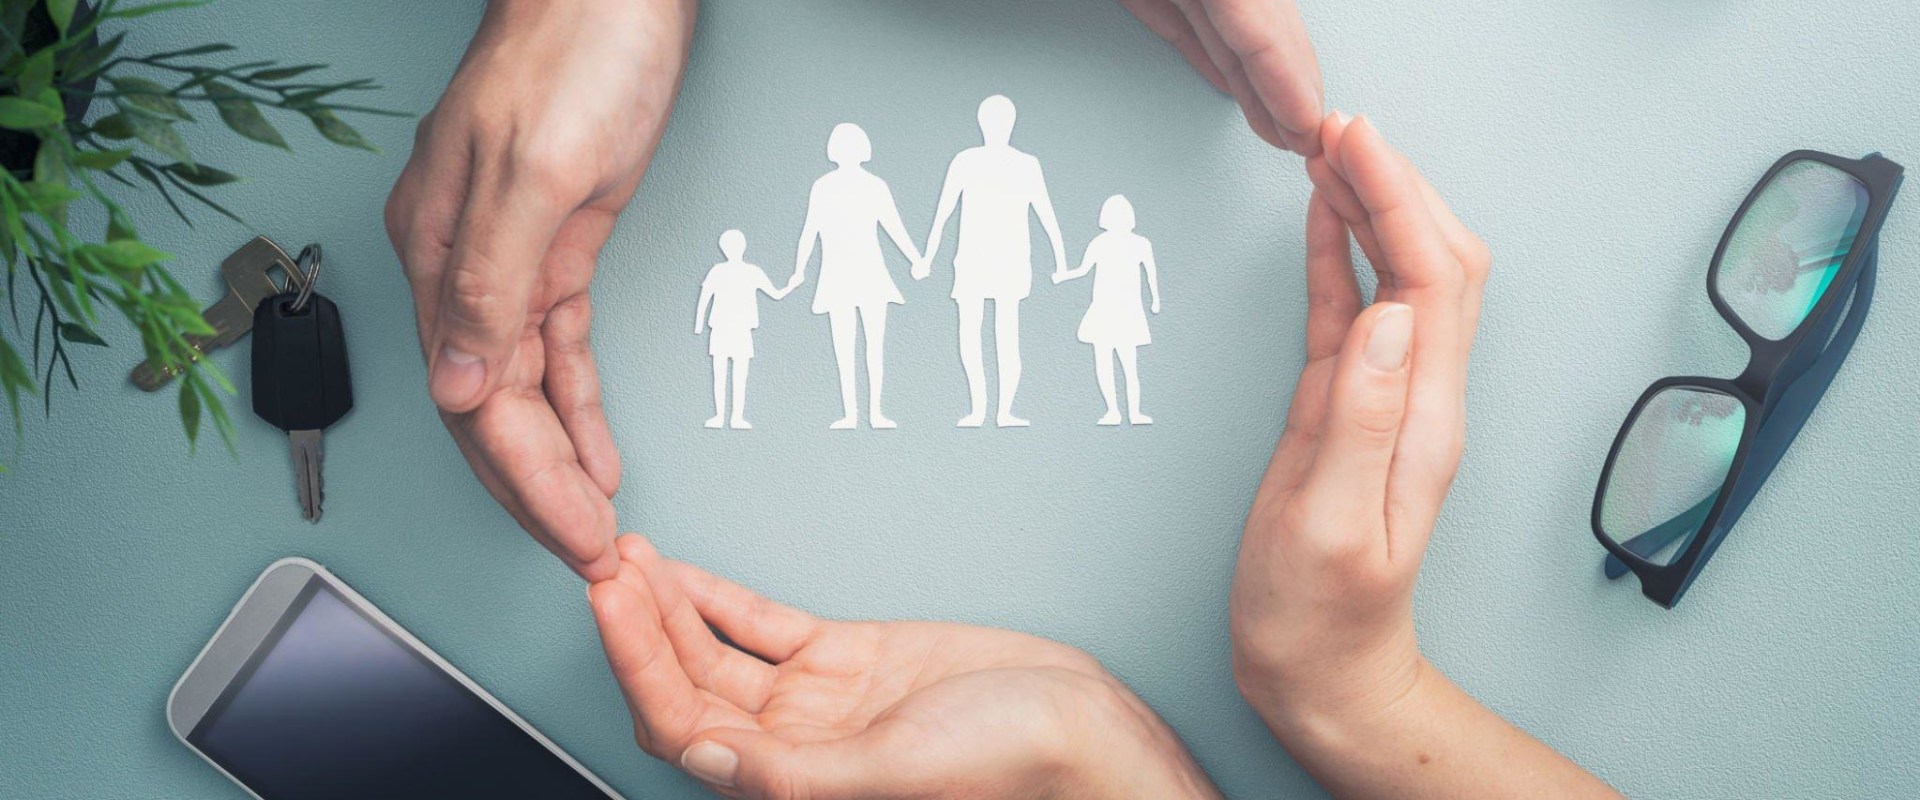 Universal Life Insurance: What You Need to Know